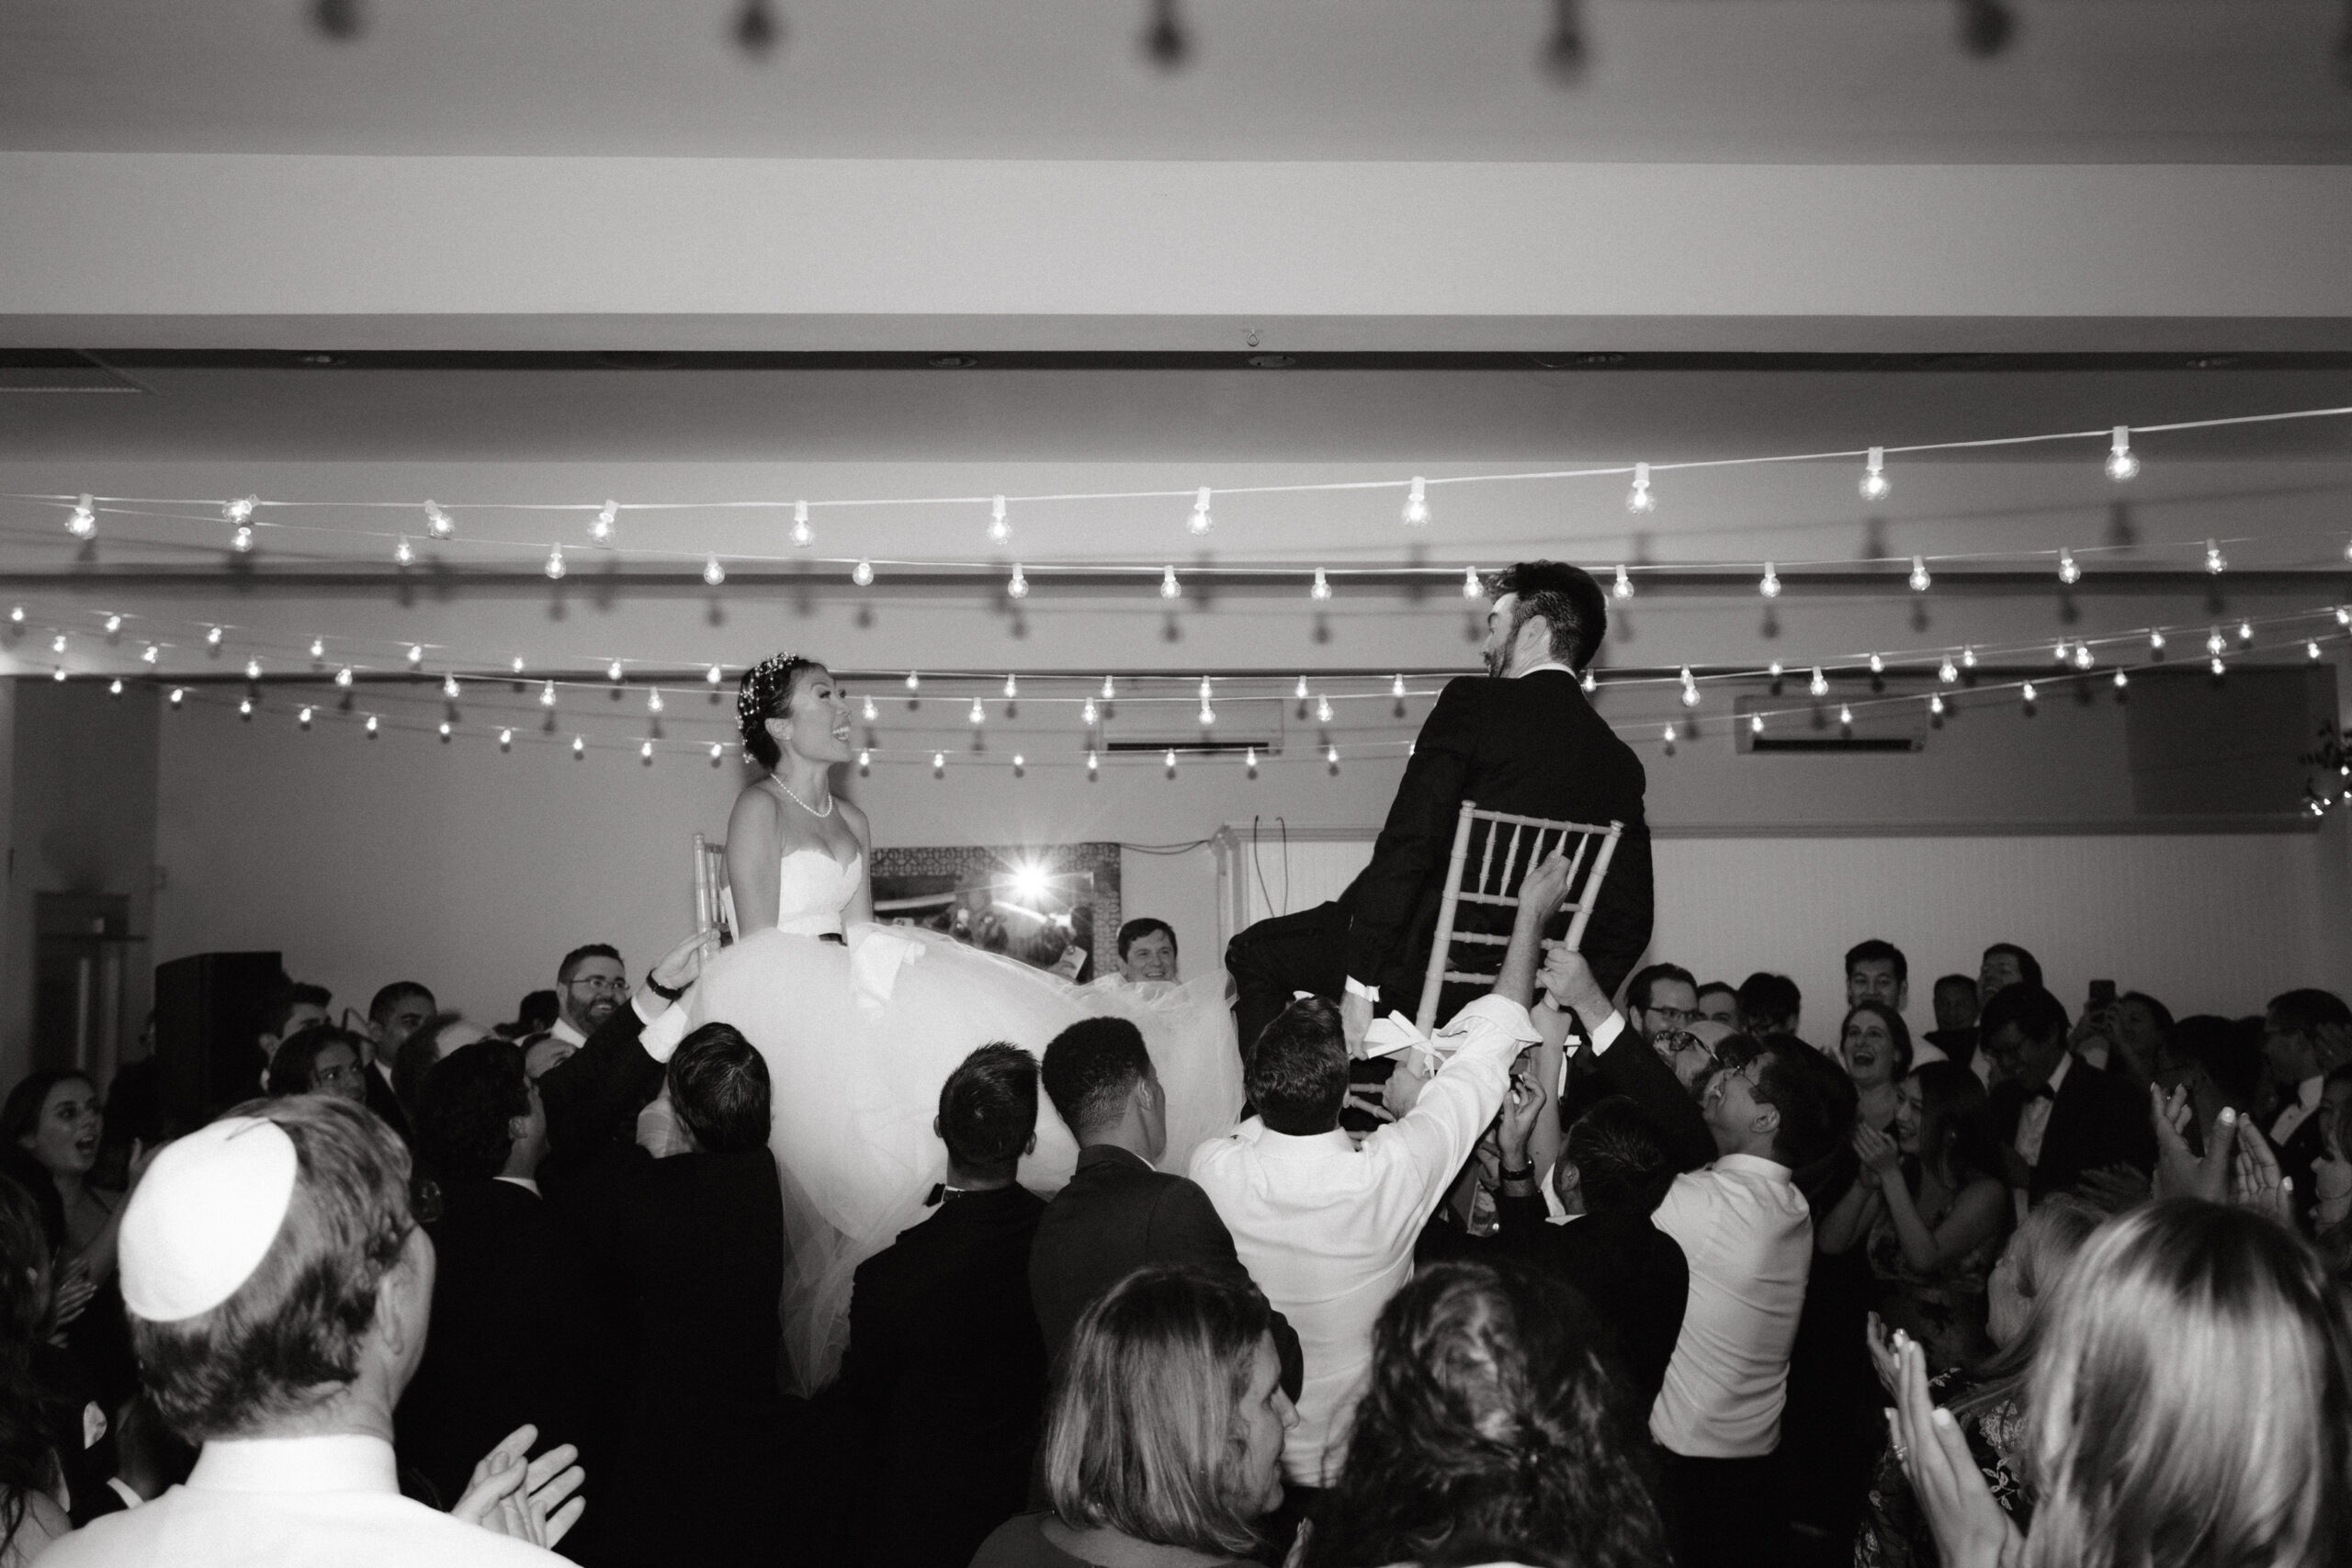 Editorial image of the bride and groom having fun in the wedding reception. Image by Jenny Fu Studio